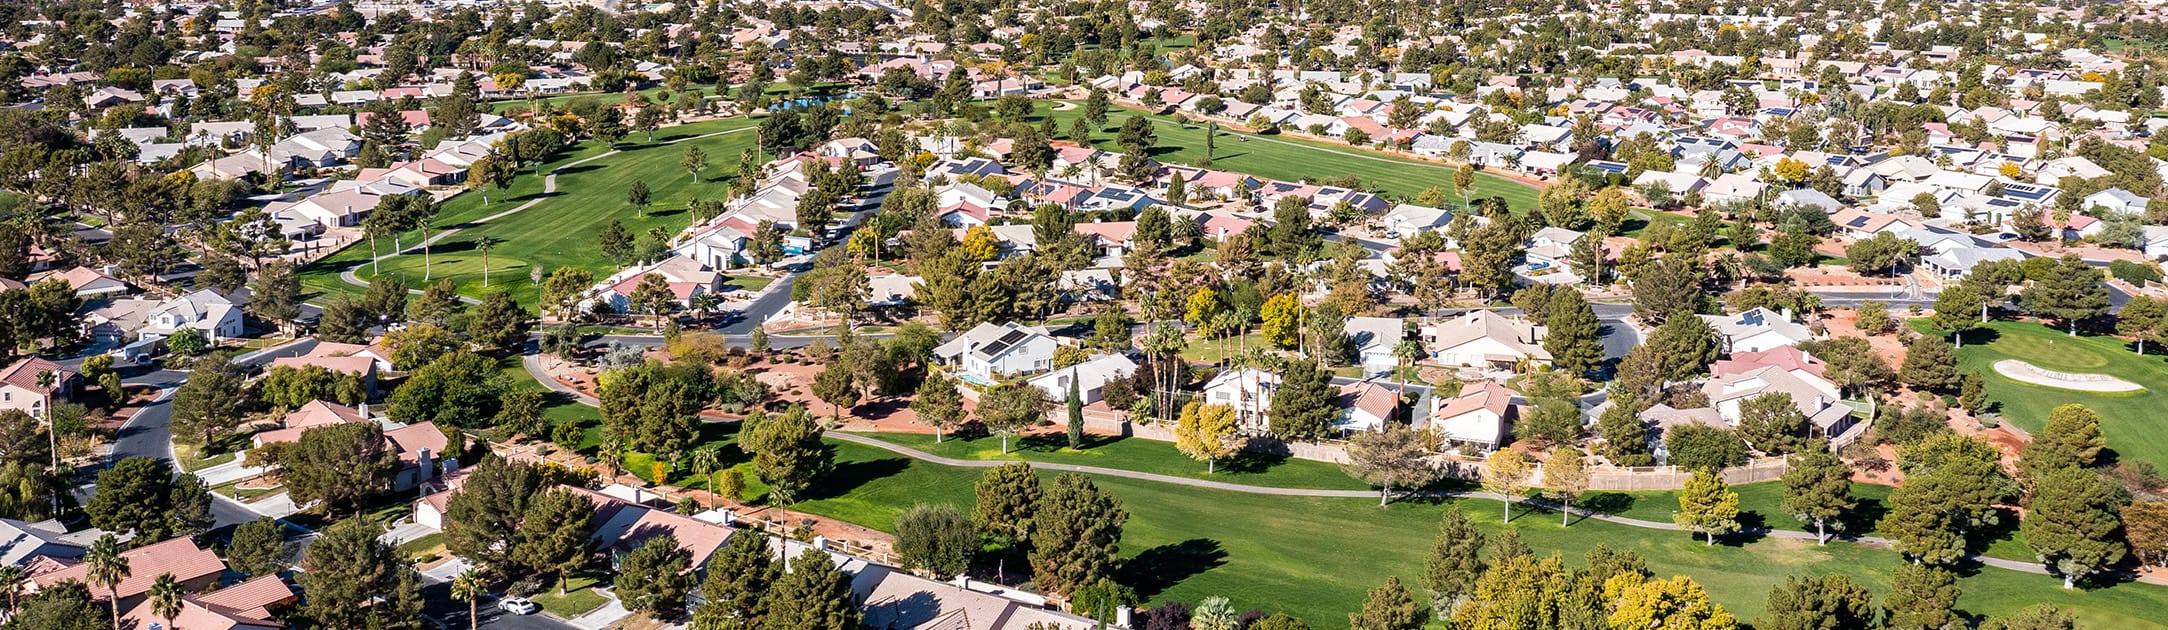 Aerial view of neighborhood with golf course surrounding luxury homes.